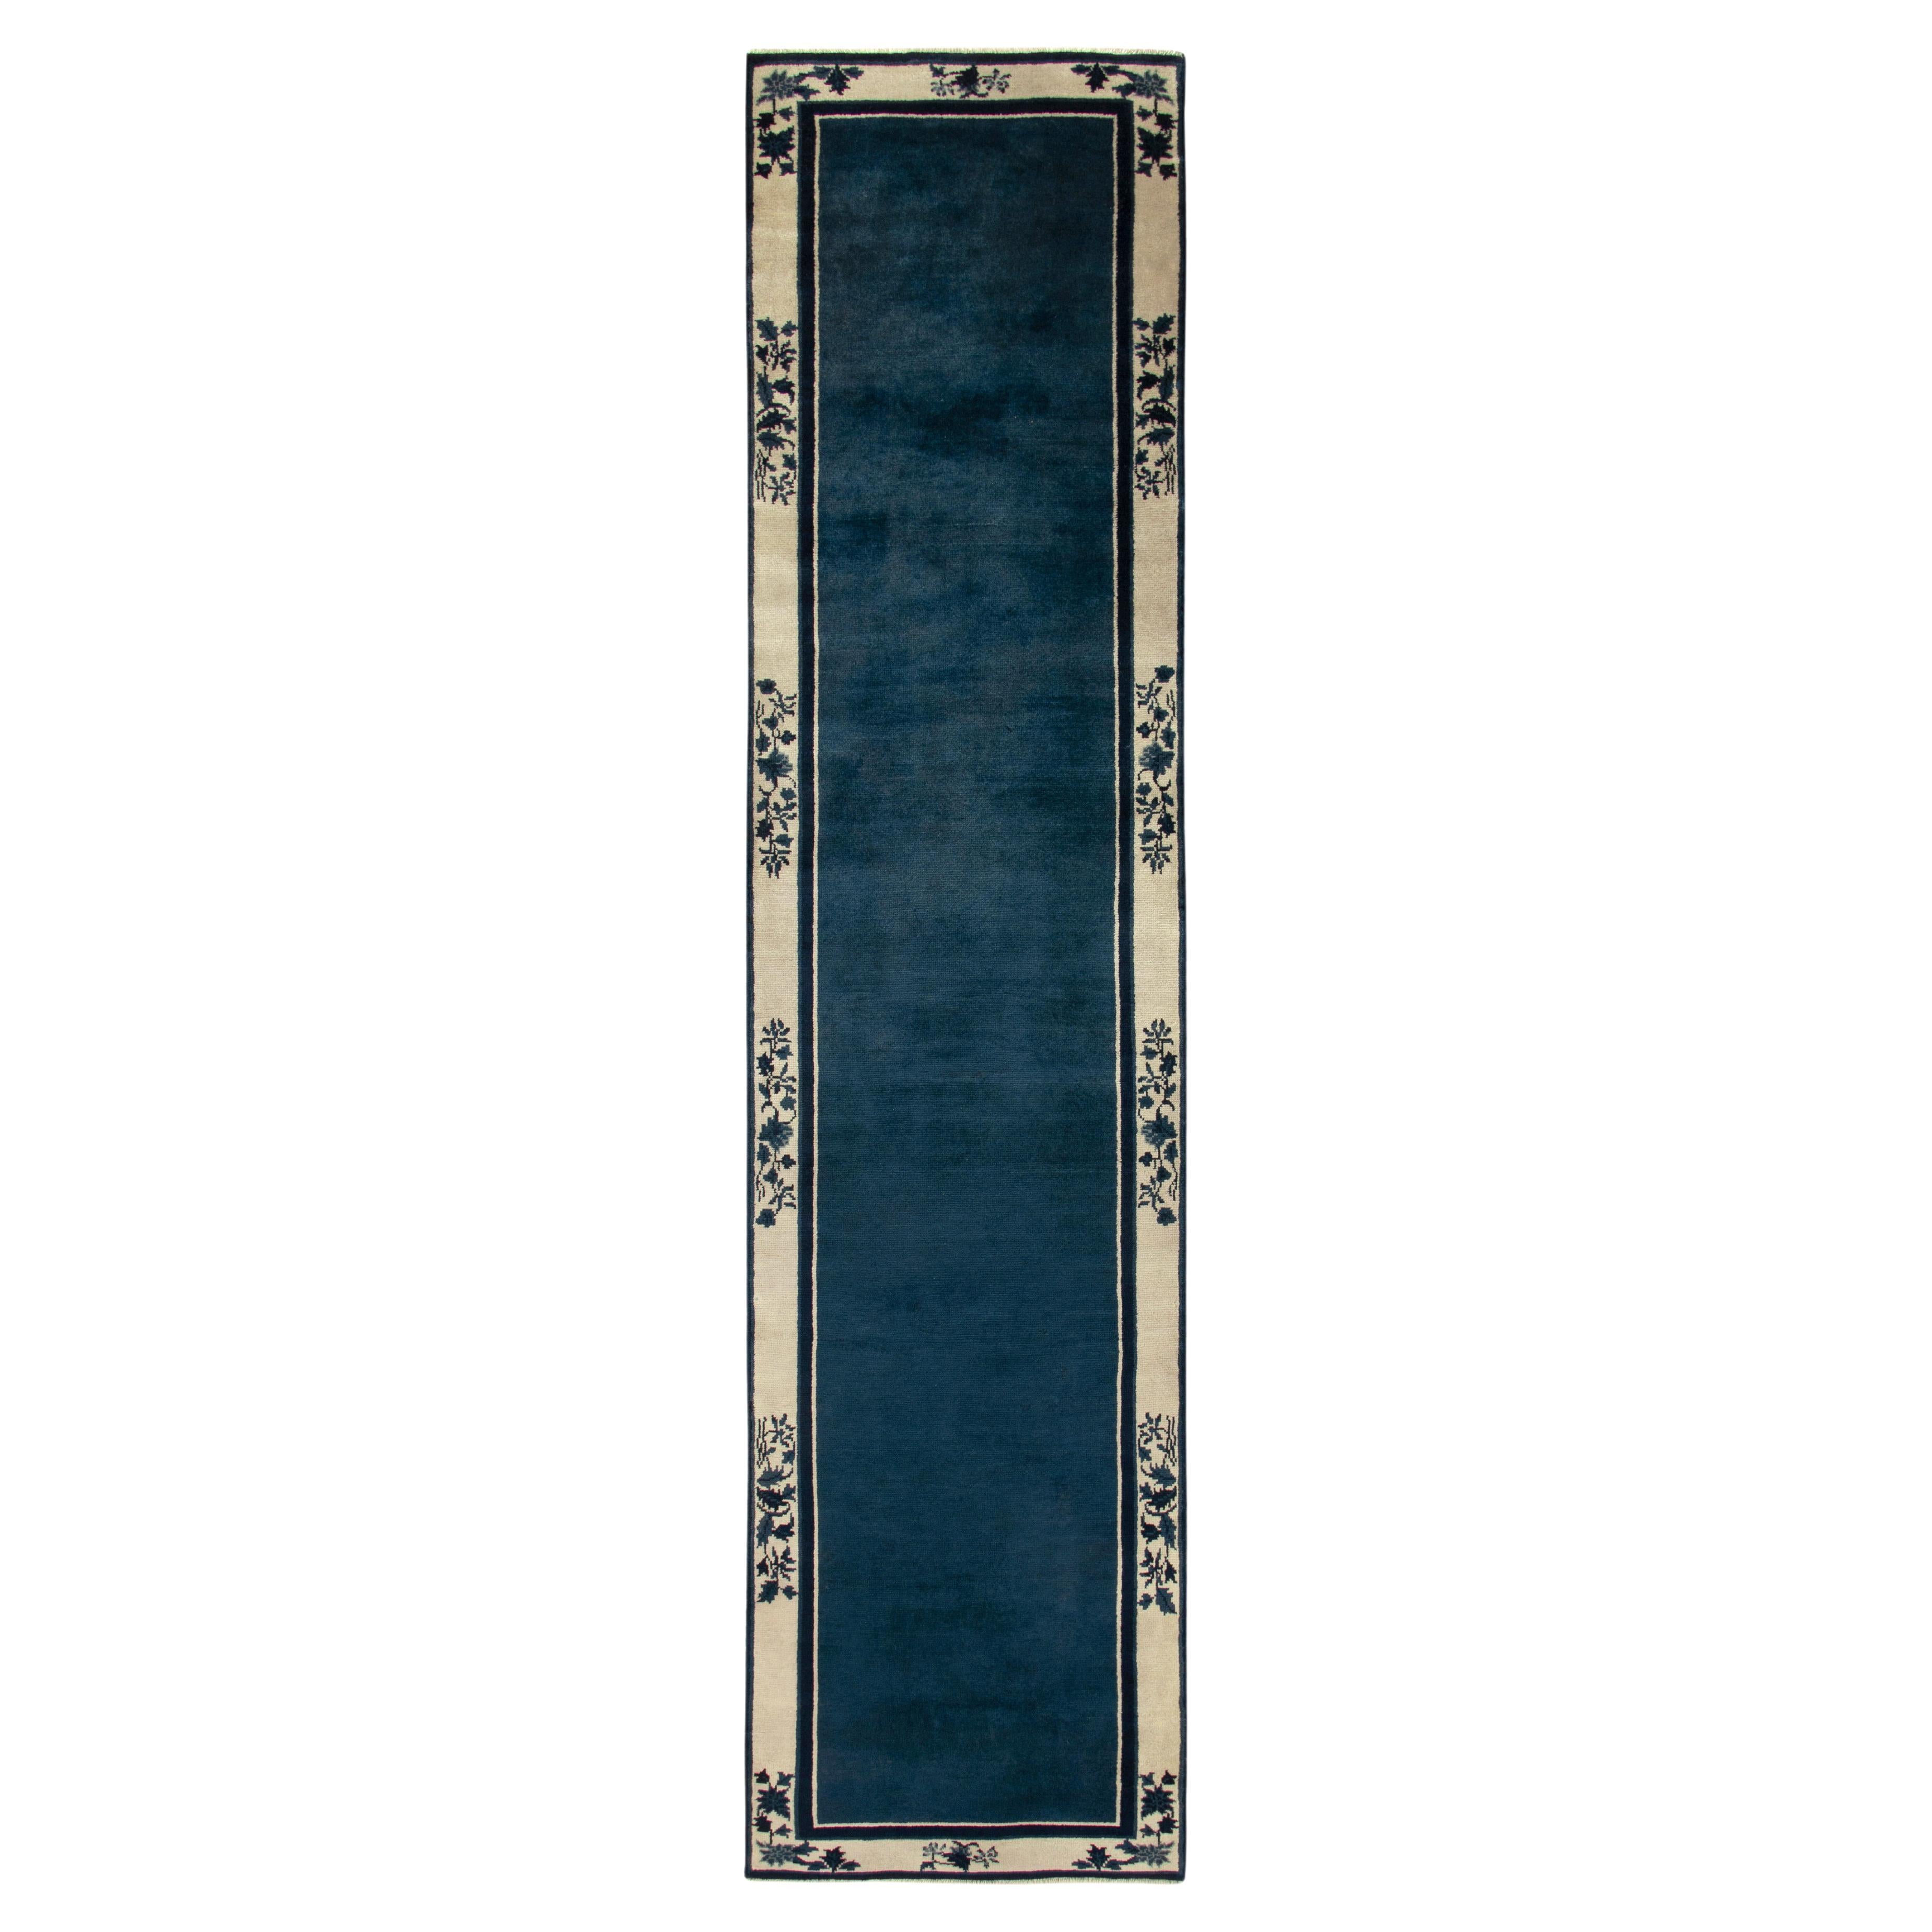 Vintage Chinese Deco Style Runner in Deep Blue, off White Floral Pattern Border